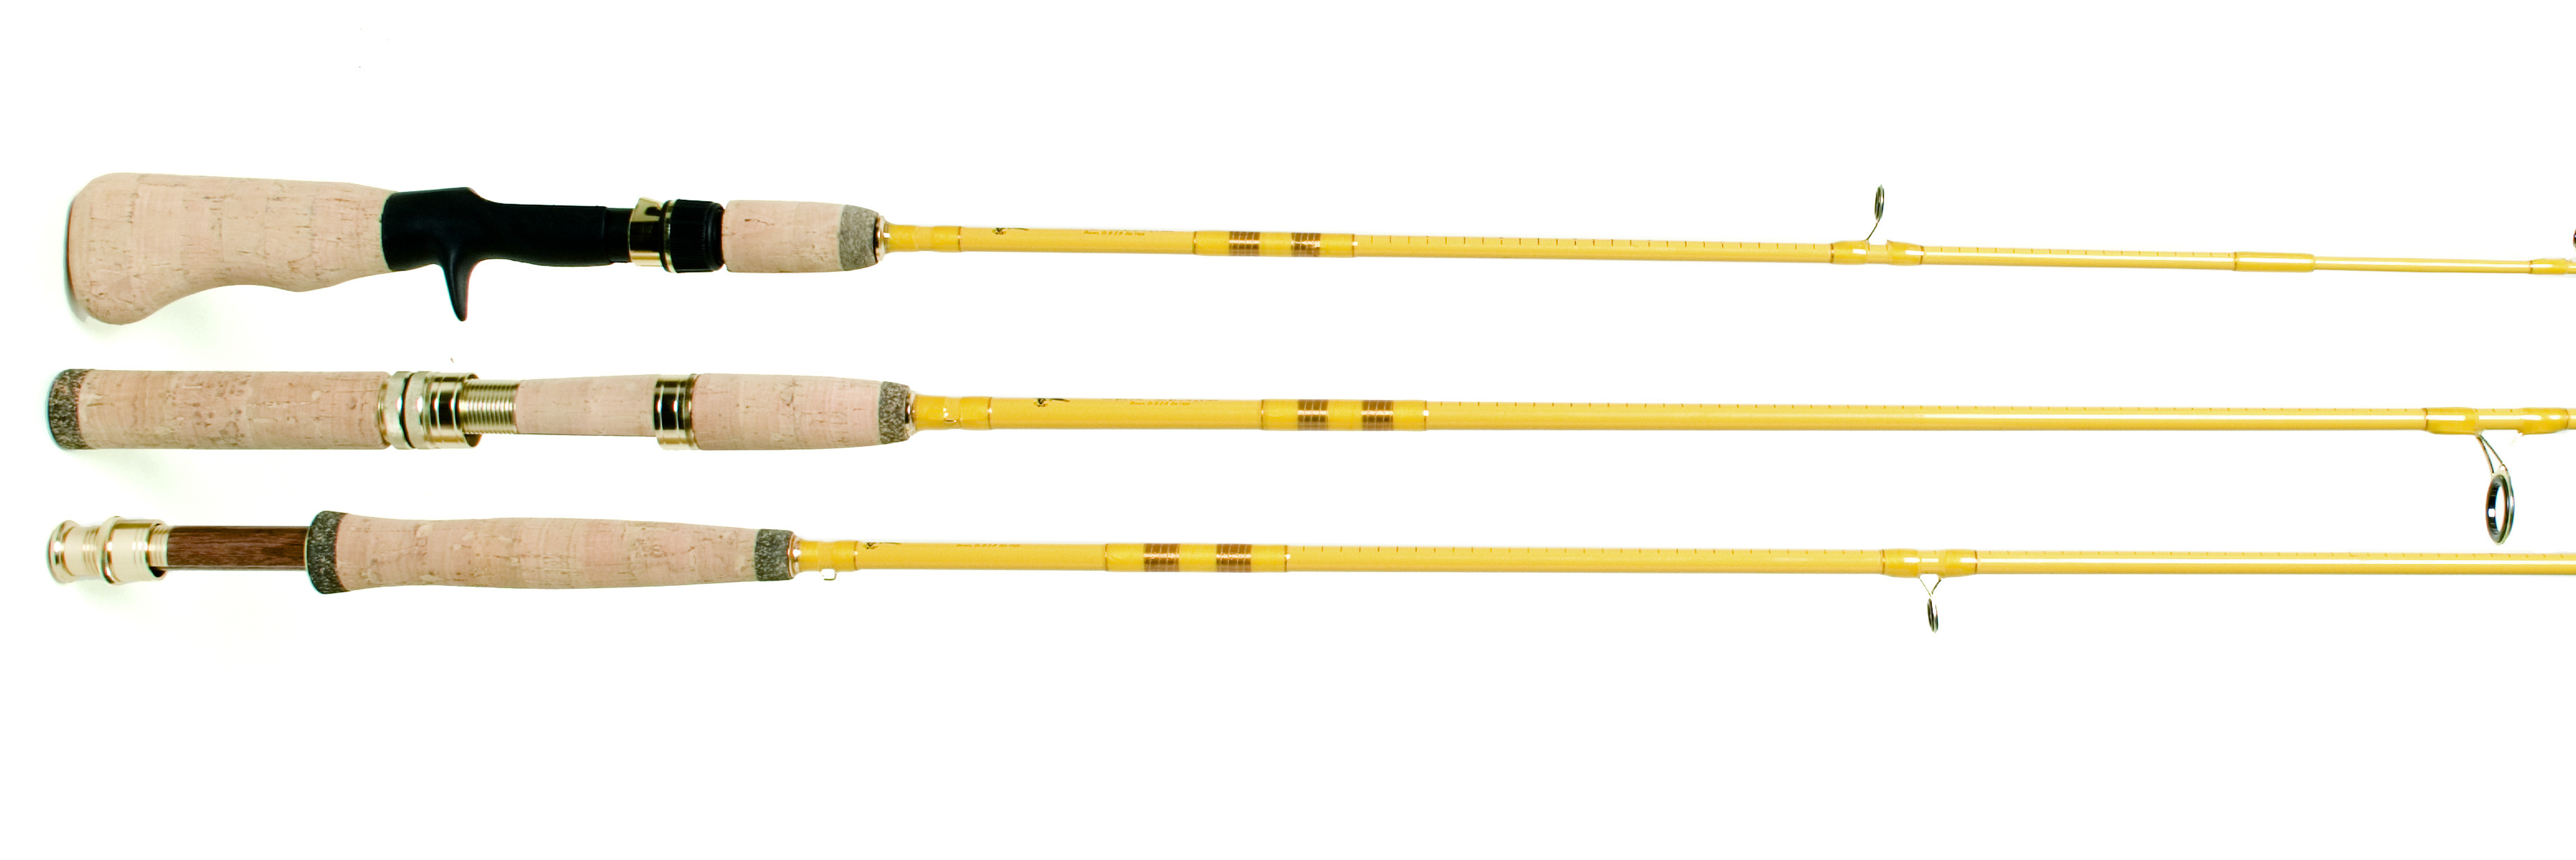 Eagle Claw Powerlight IM-7 5 Weight Fly Rod, 4 Piece, Yellow, 9